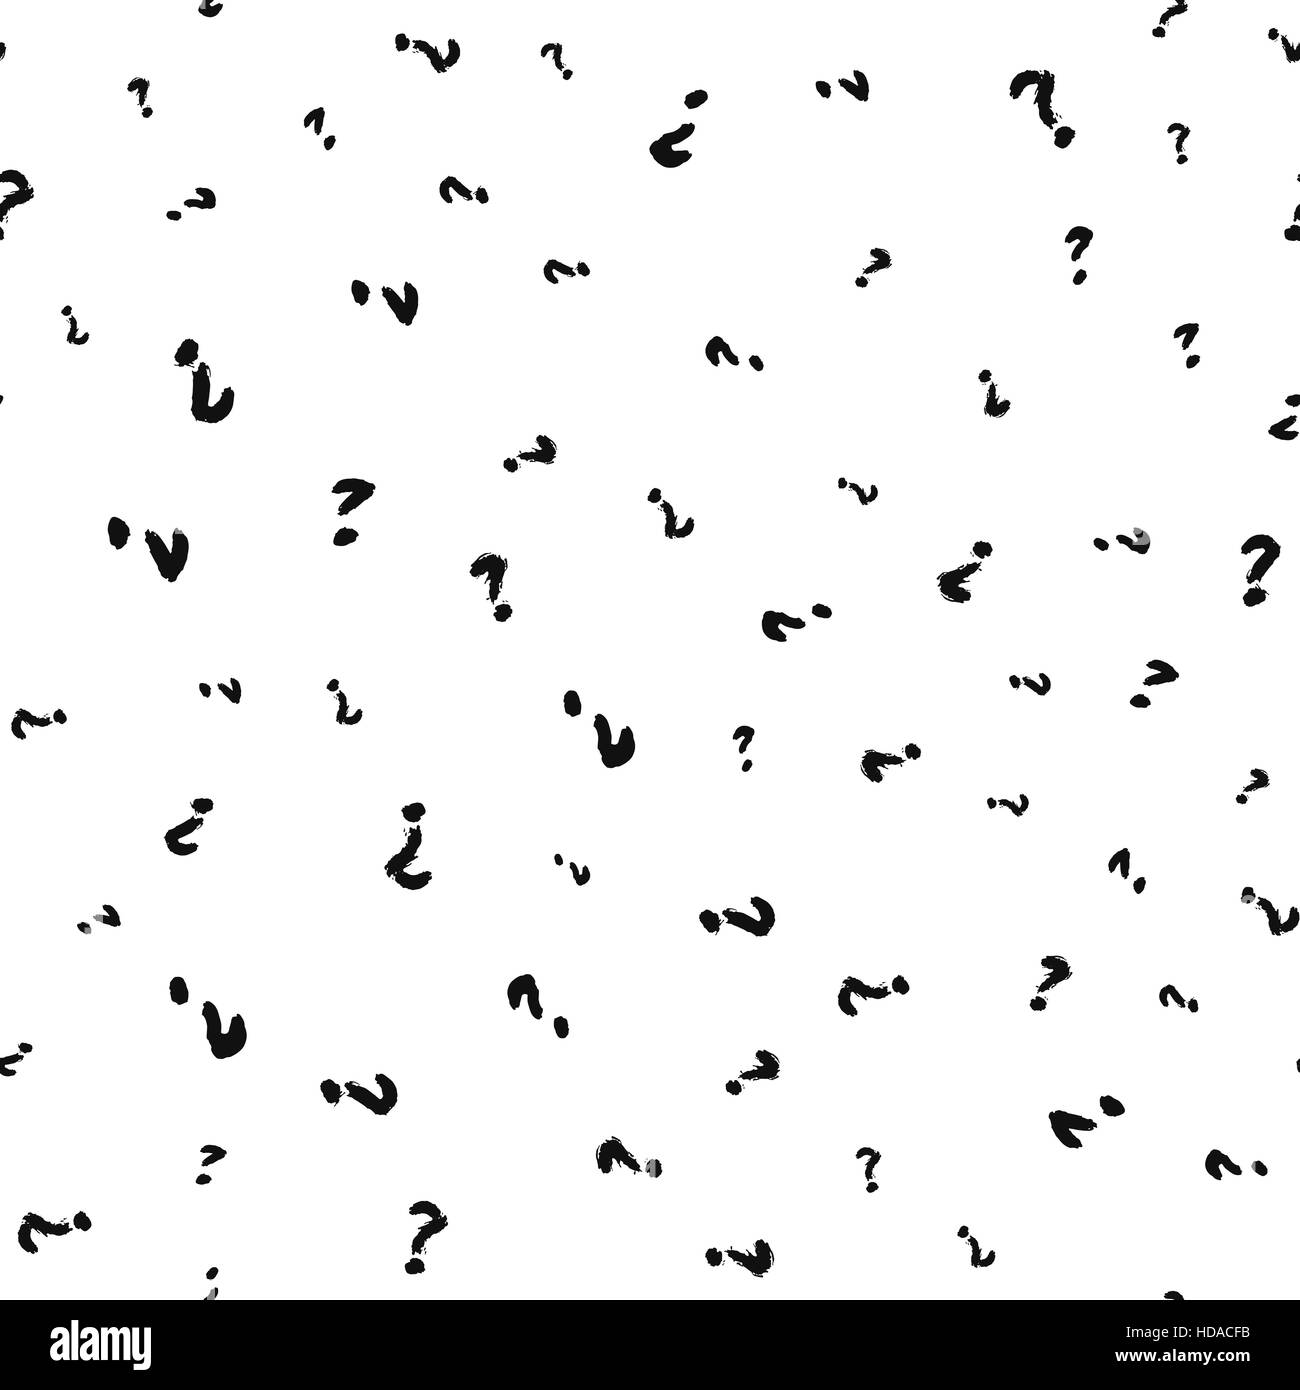 Unusual background question marks Stock Vector Images - Alamy